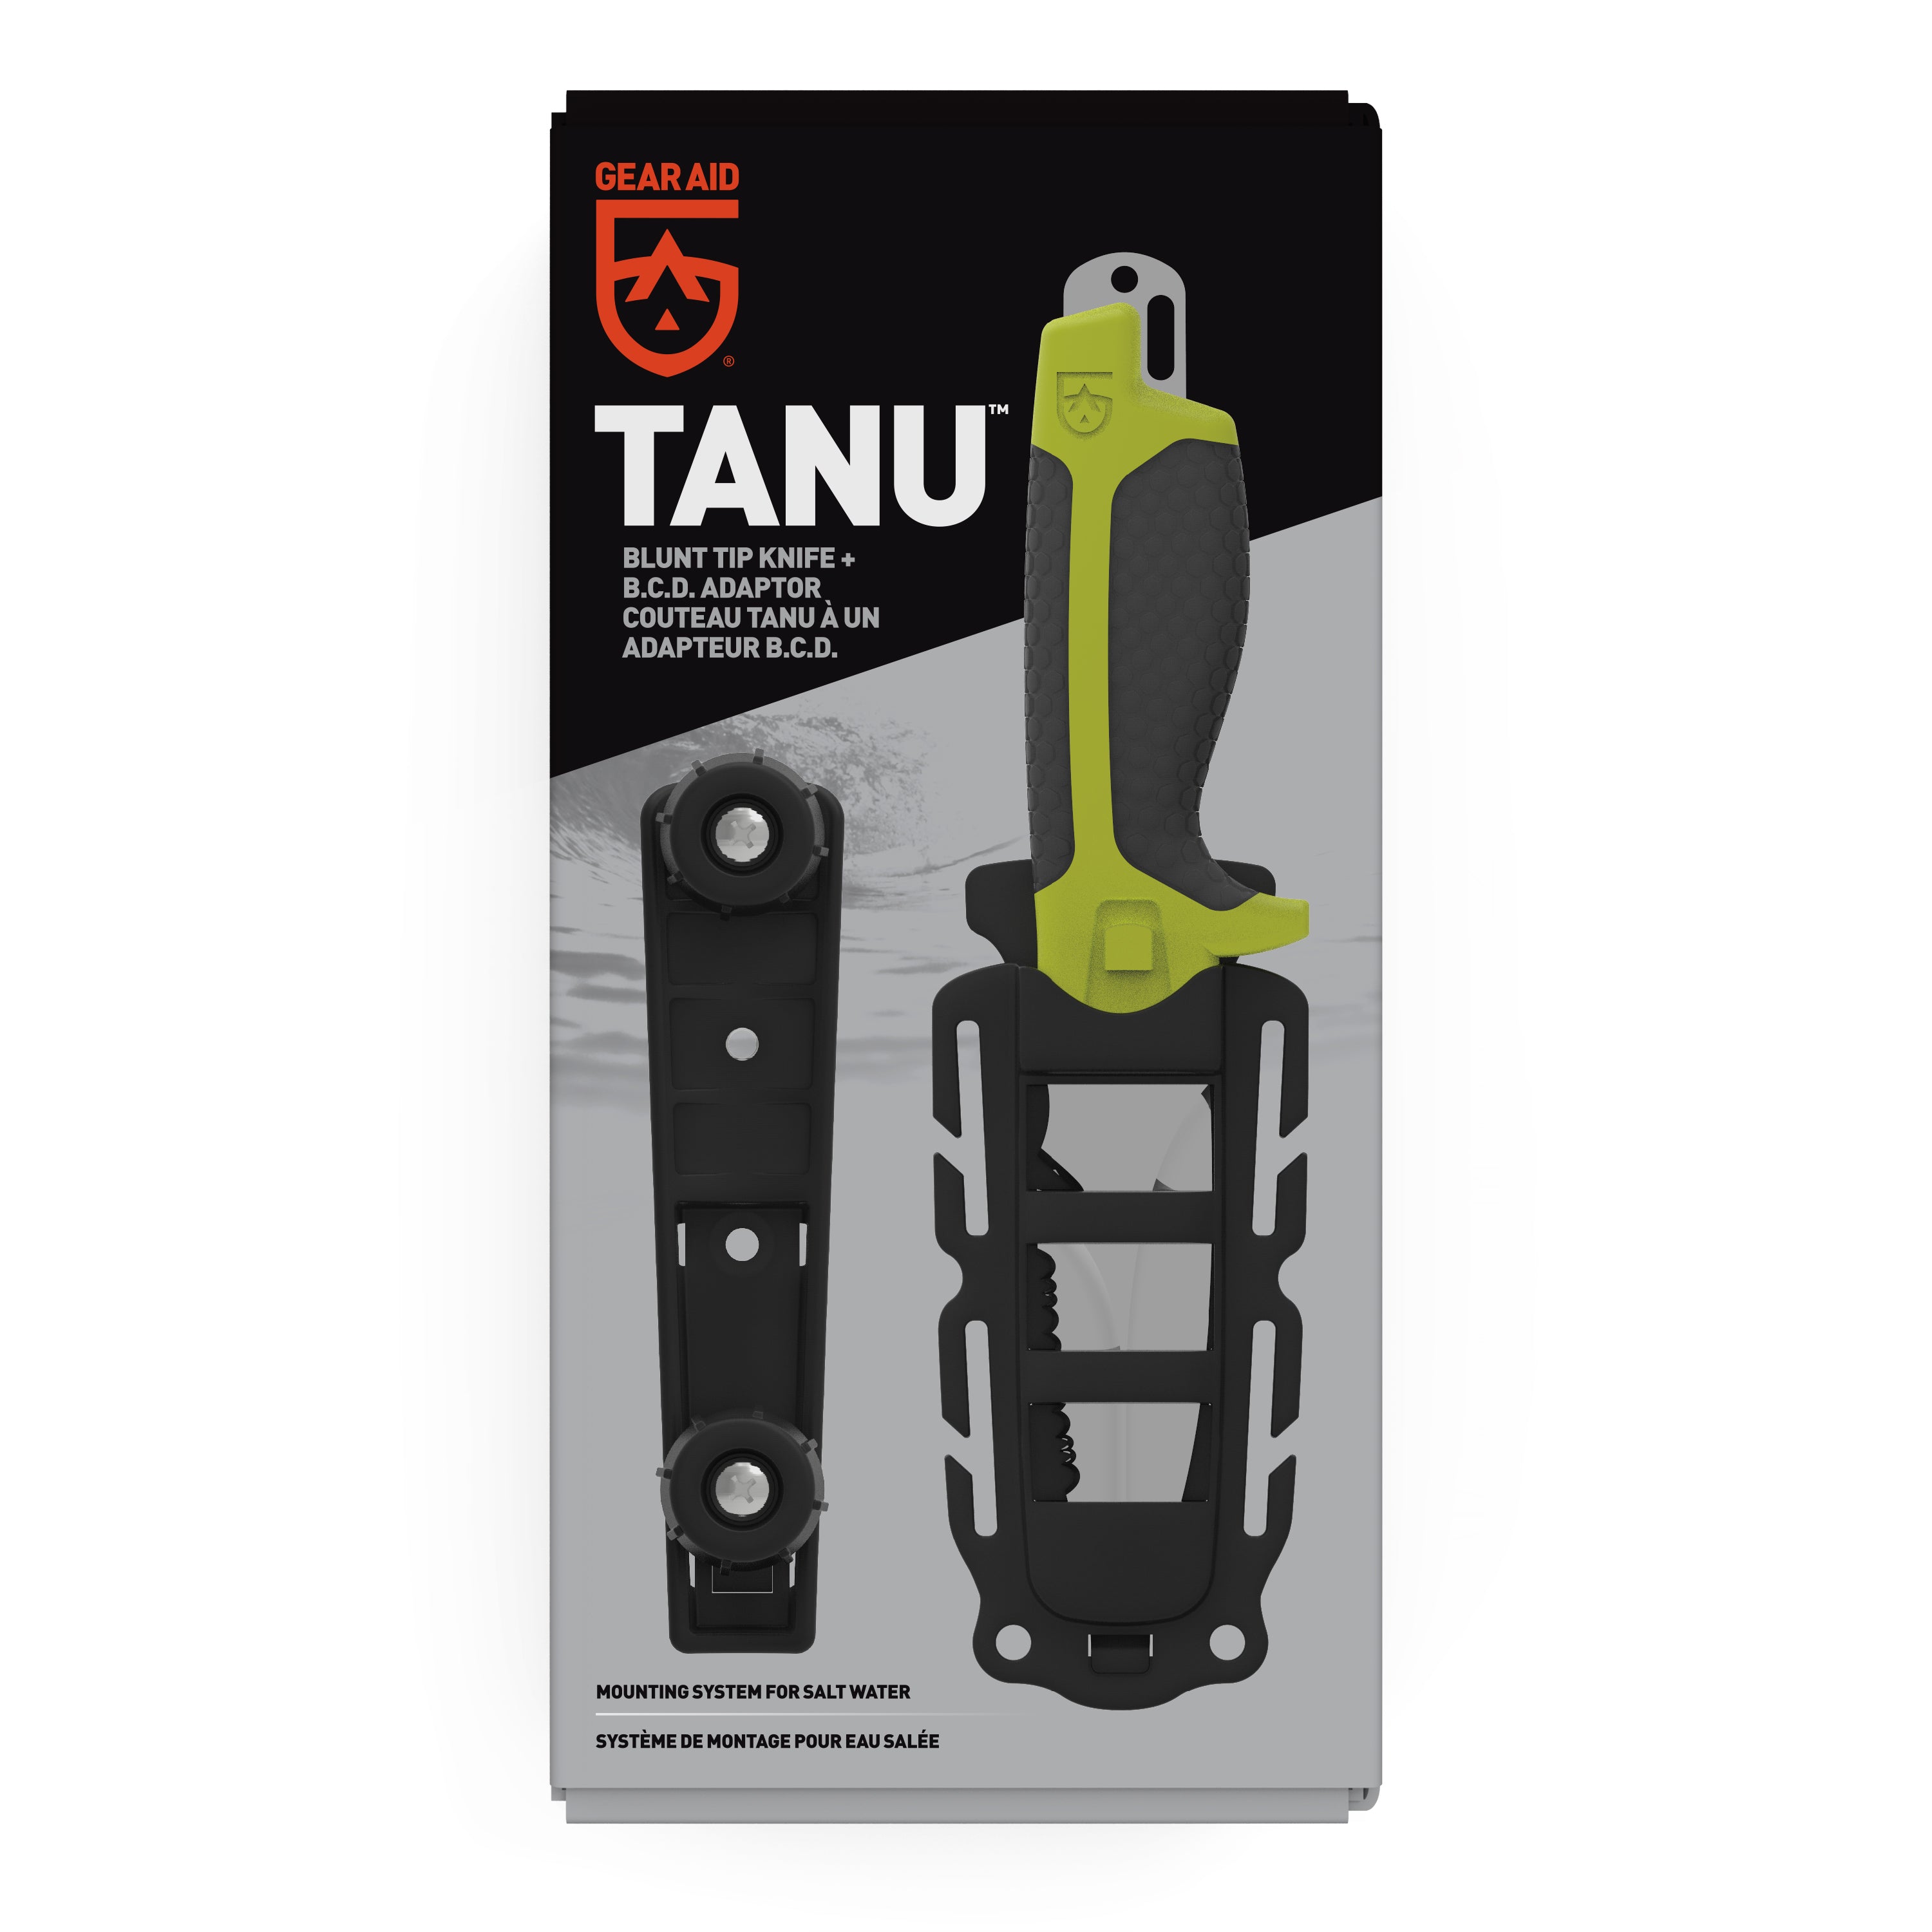 Gear Aid 3 Tanu Dive and Rescue Blunt Tip Fixed Knife with B.C.D. Adaptor - Gray